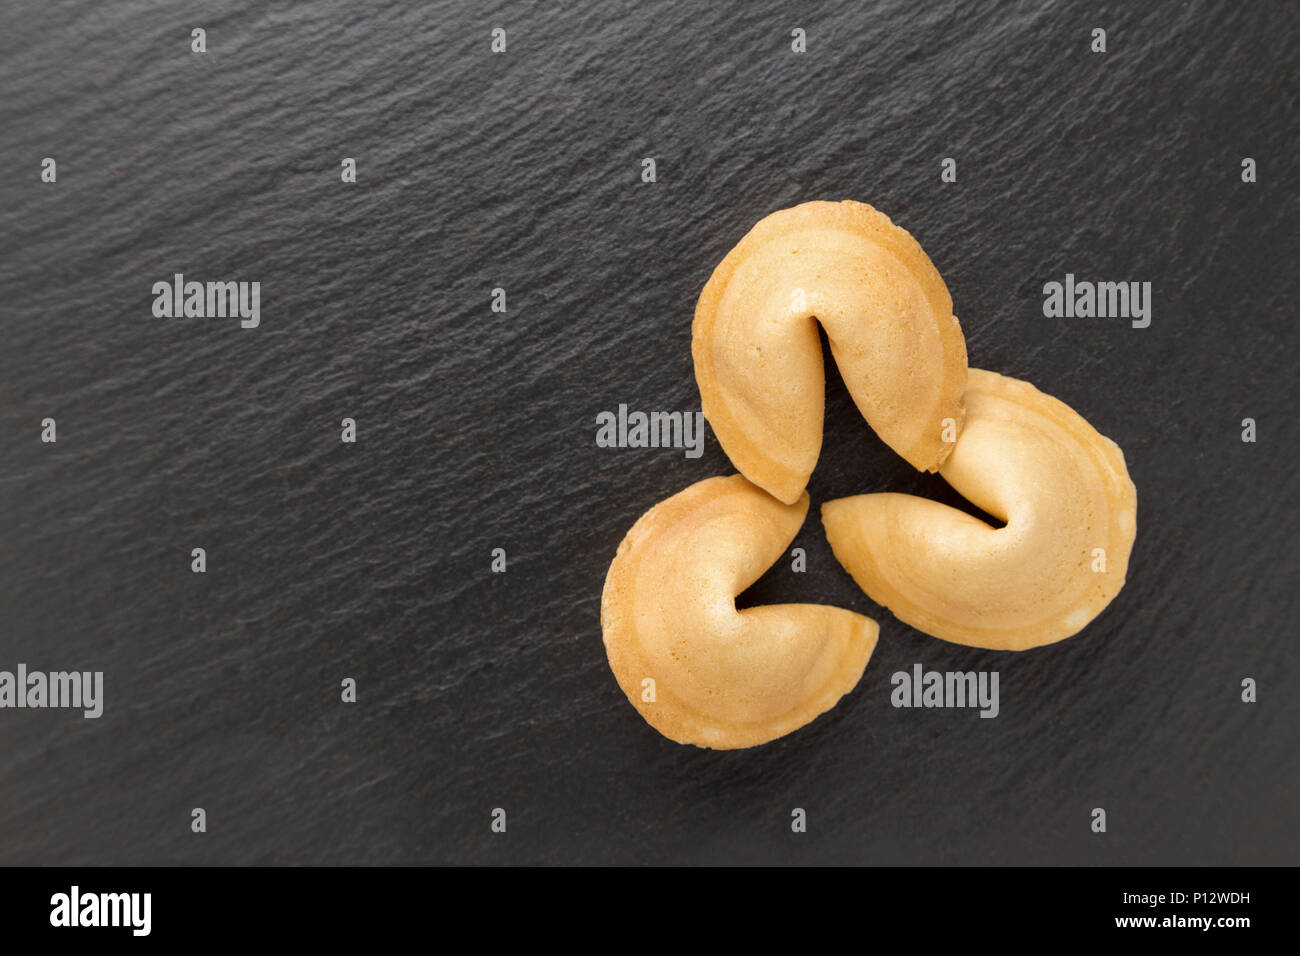 traditional Chinese pastry with the wishes or predictions on a black background Stock Photo